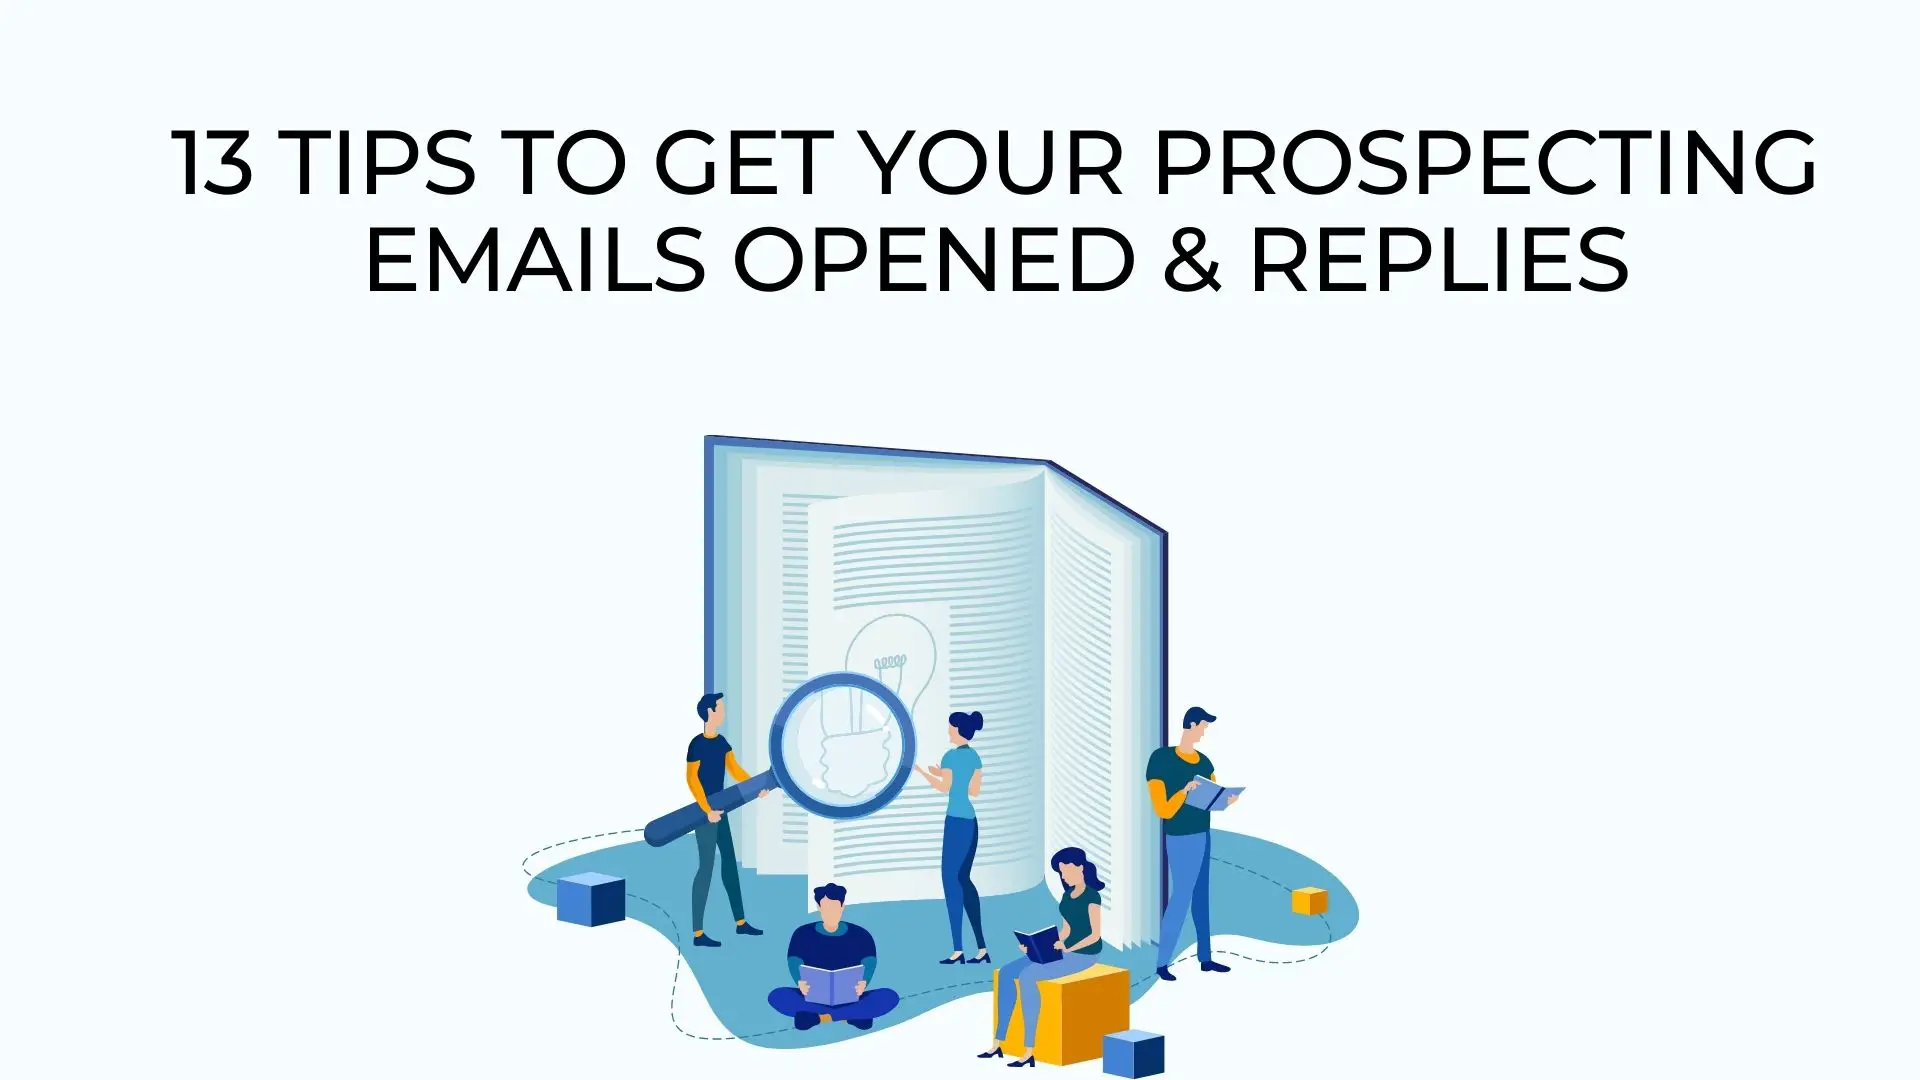 13 Tips To Get Your Prospecting Emails Opened & Replies